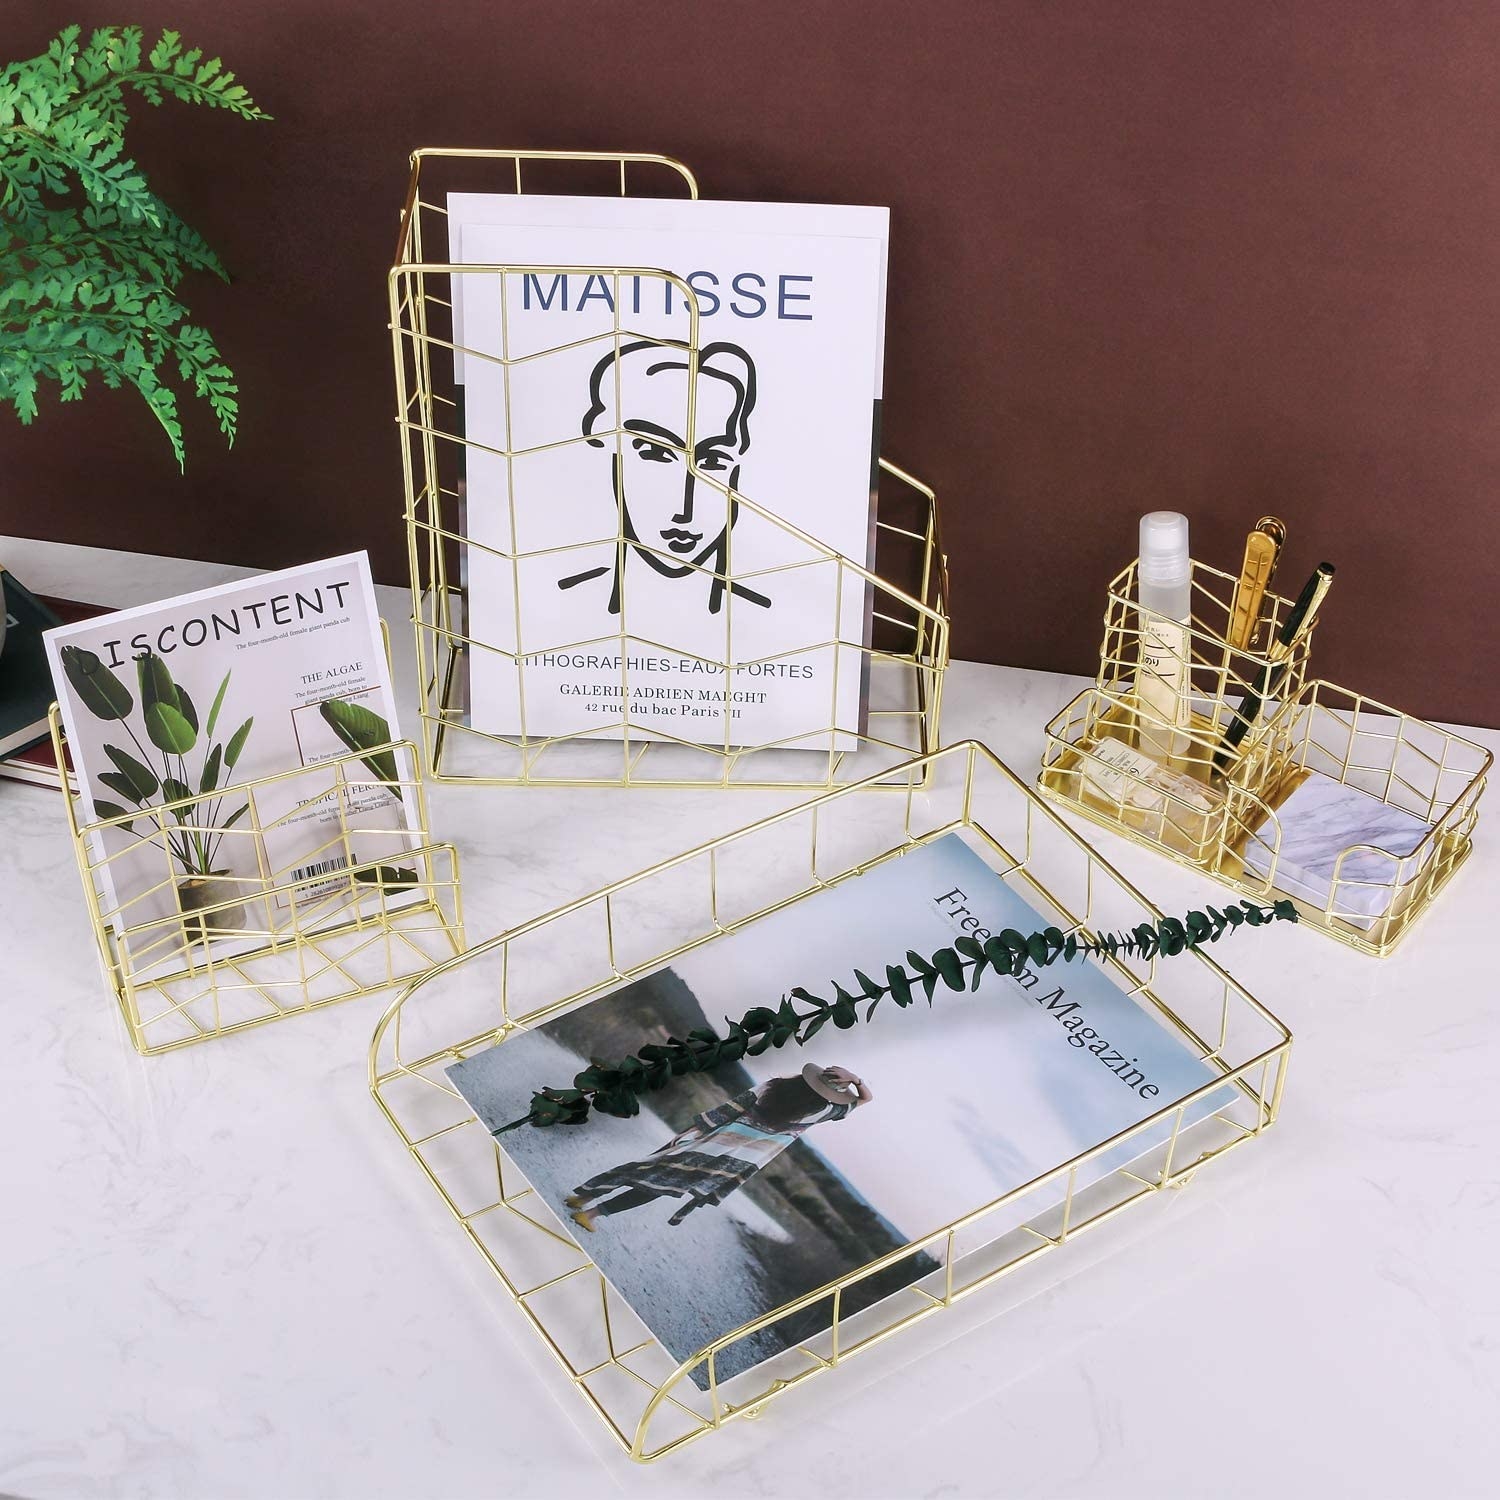 A metal magazine holder, A pencil holder, and a paper tray on a table